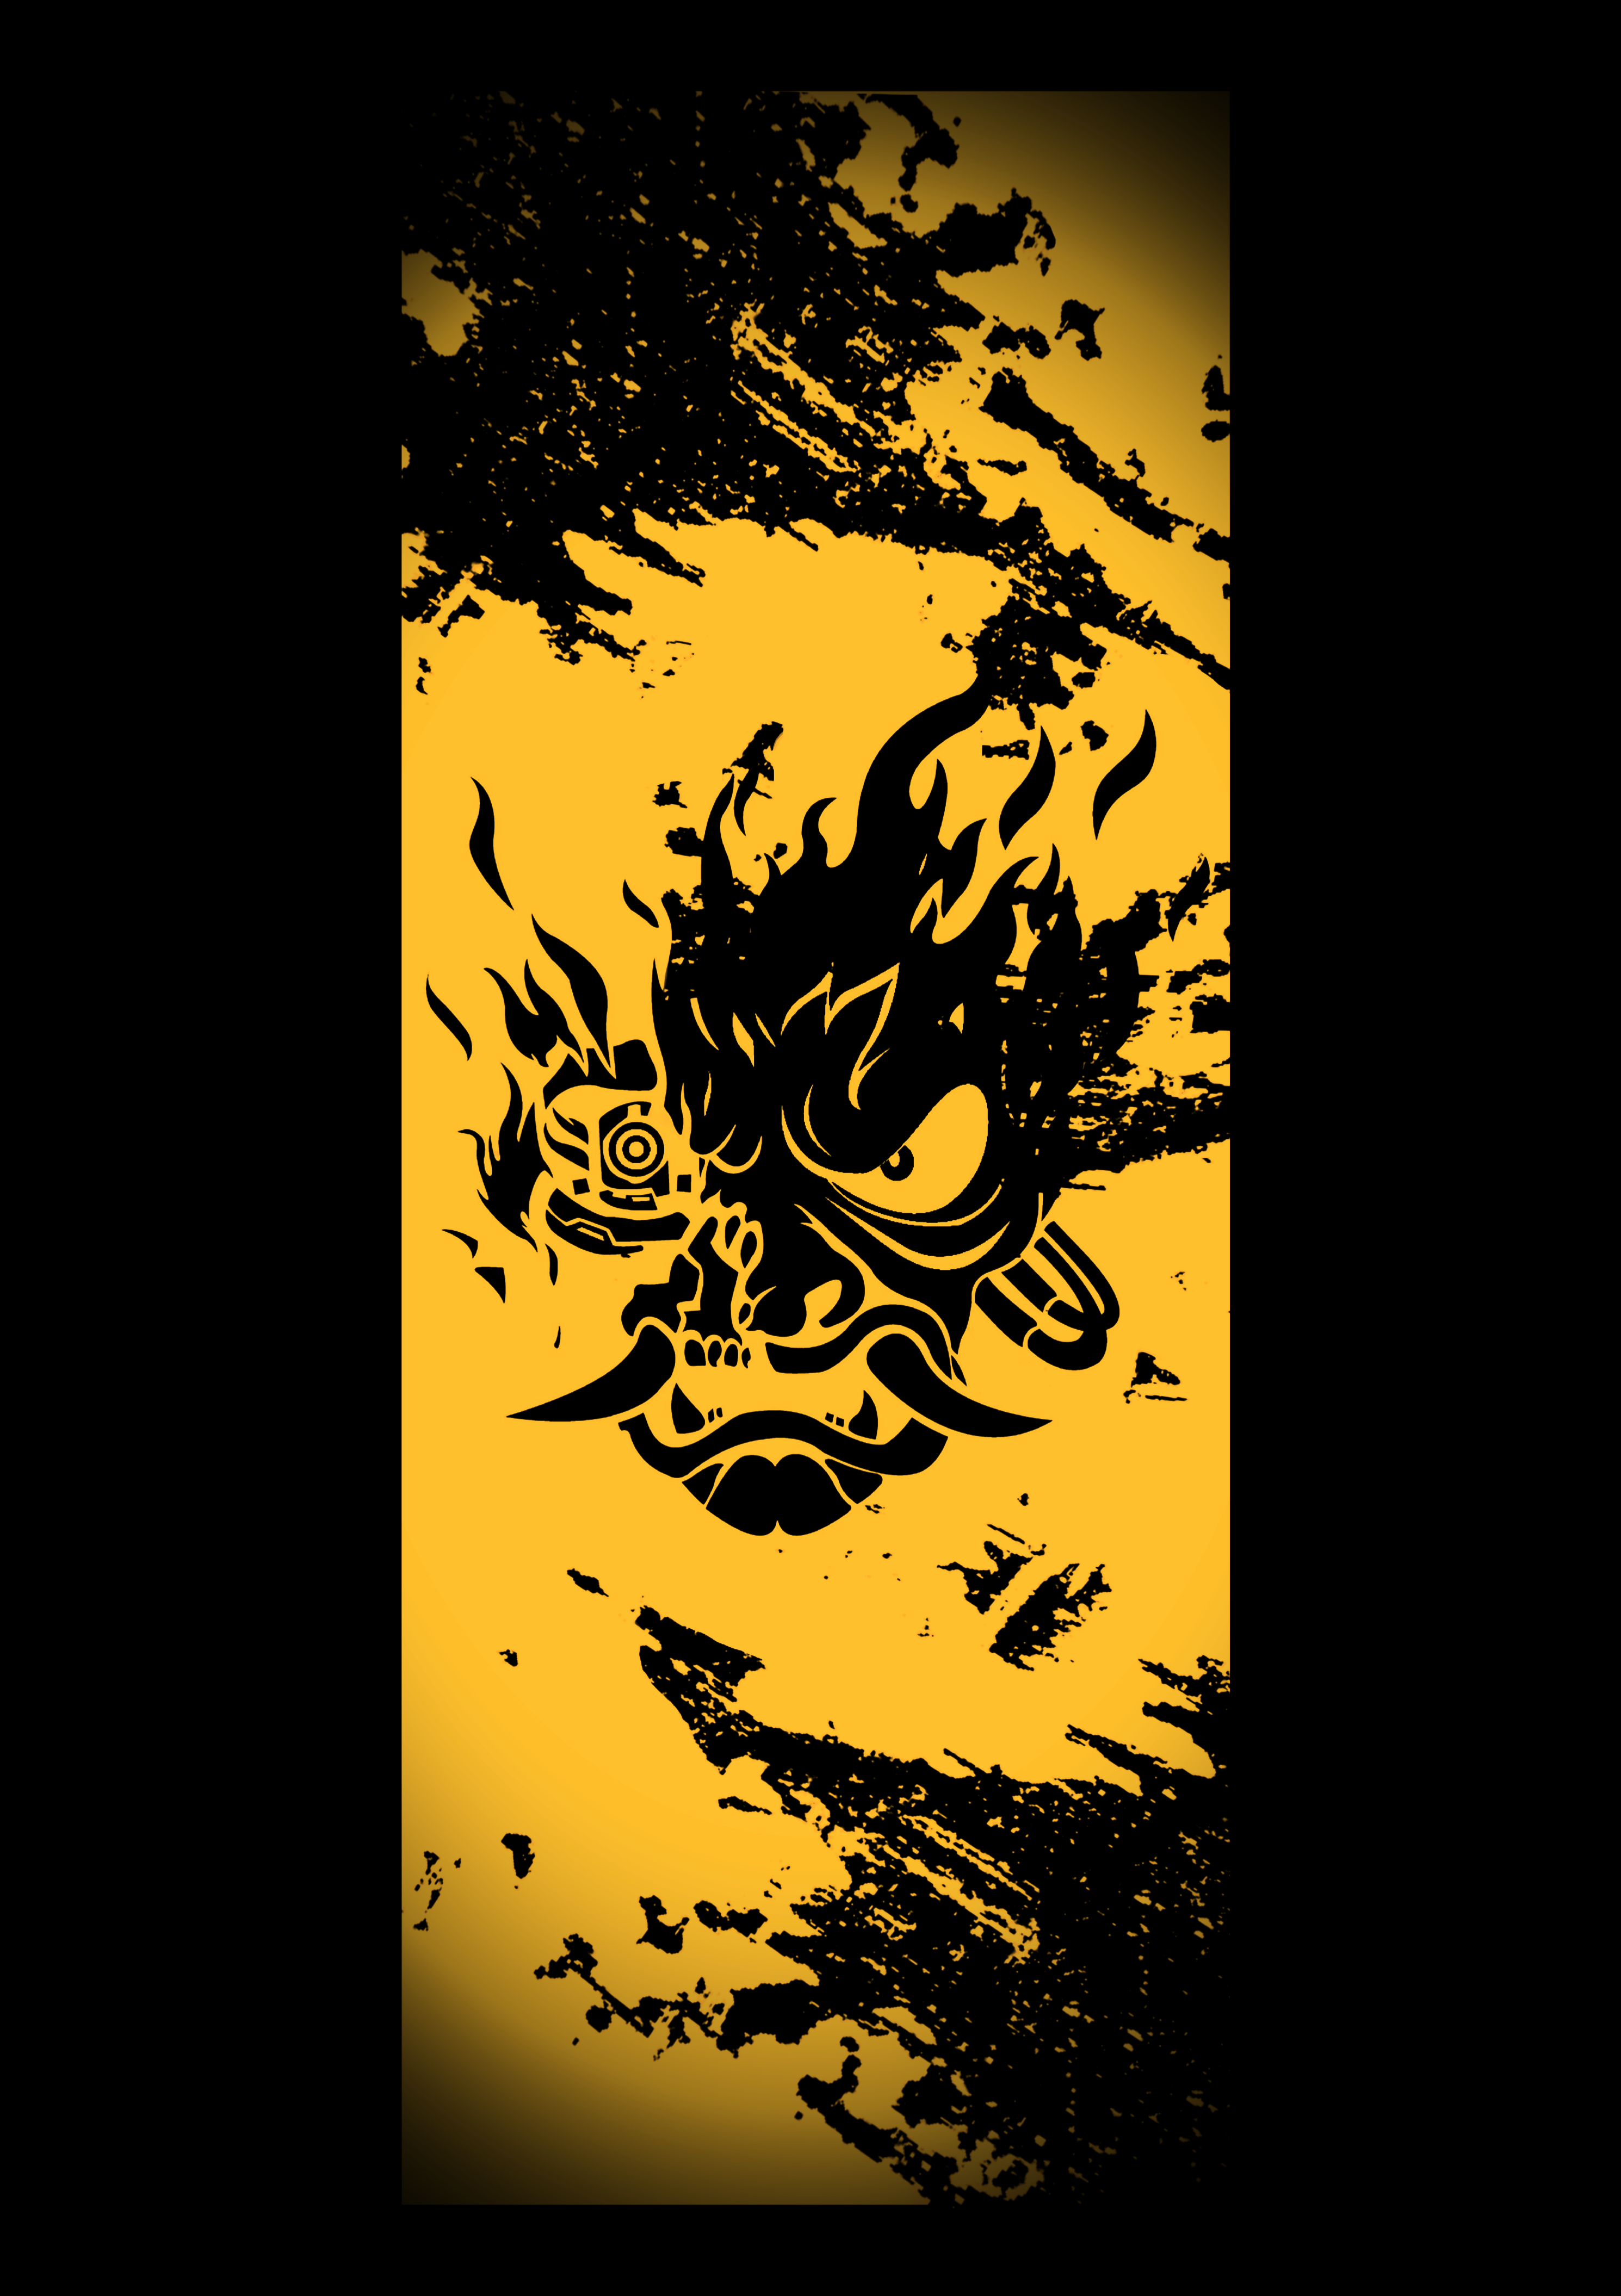 Used the Samurai Oni to make this phone wallpaper for you